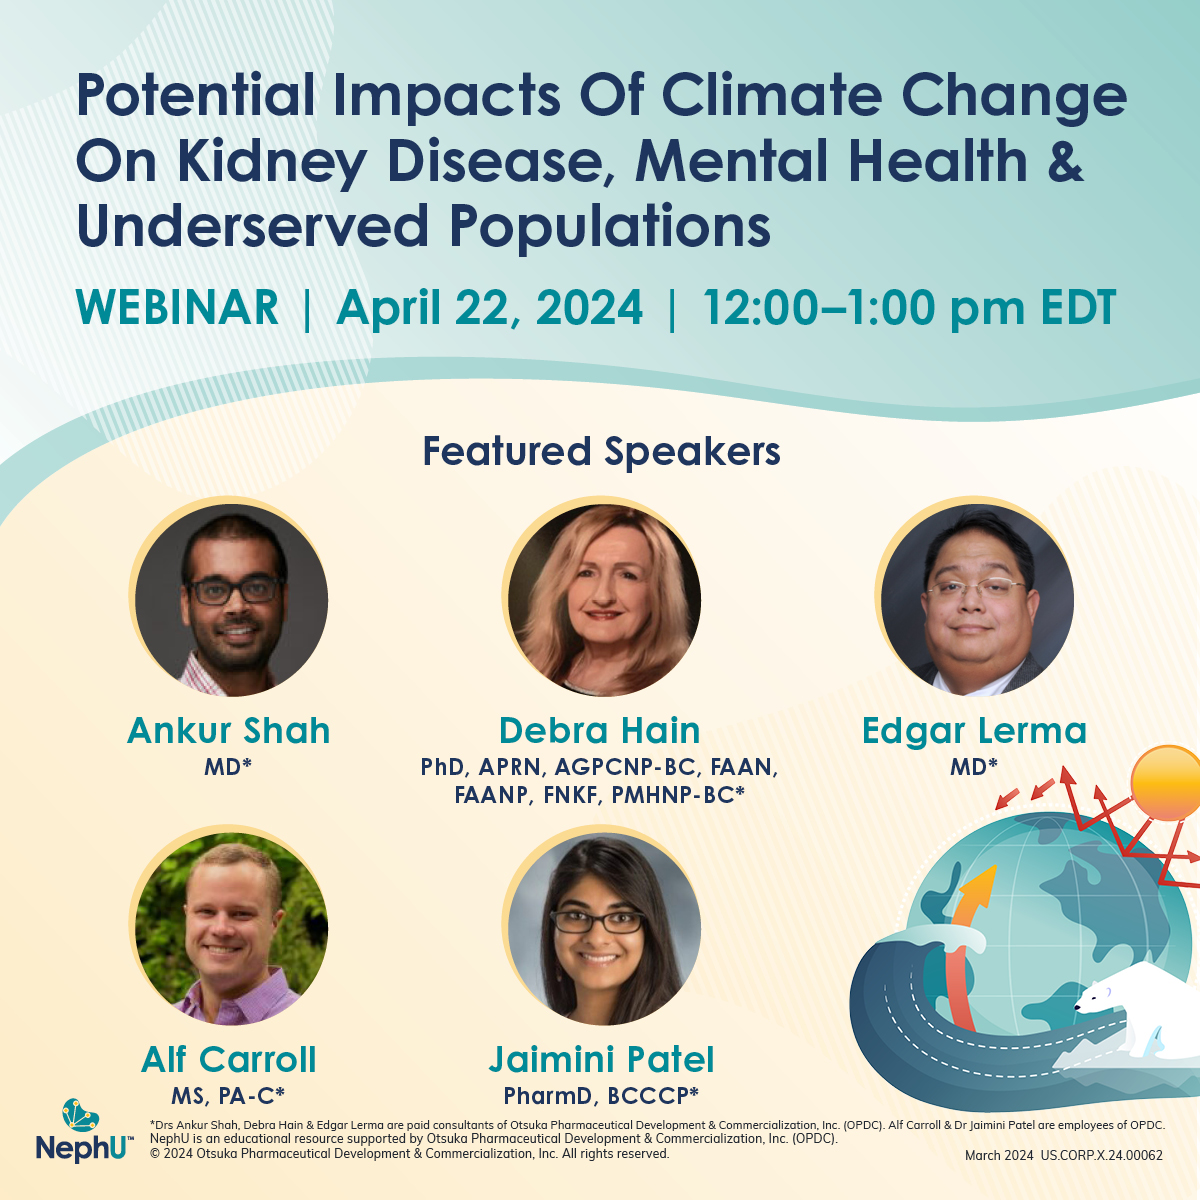 Don't miss out! Sign up for our upcoming webinar, 'Potential Impacts Of Climate Change On Kidney Disease, Mental Health & Underserved Populations,' and learn more of this critical topic in kidney care! go.nephu.org/M57N #ClimateChange #KidneyDisease #MentalHealth #NephU